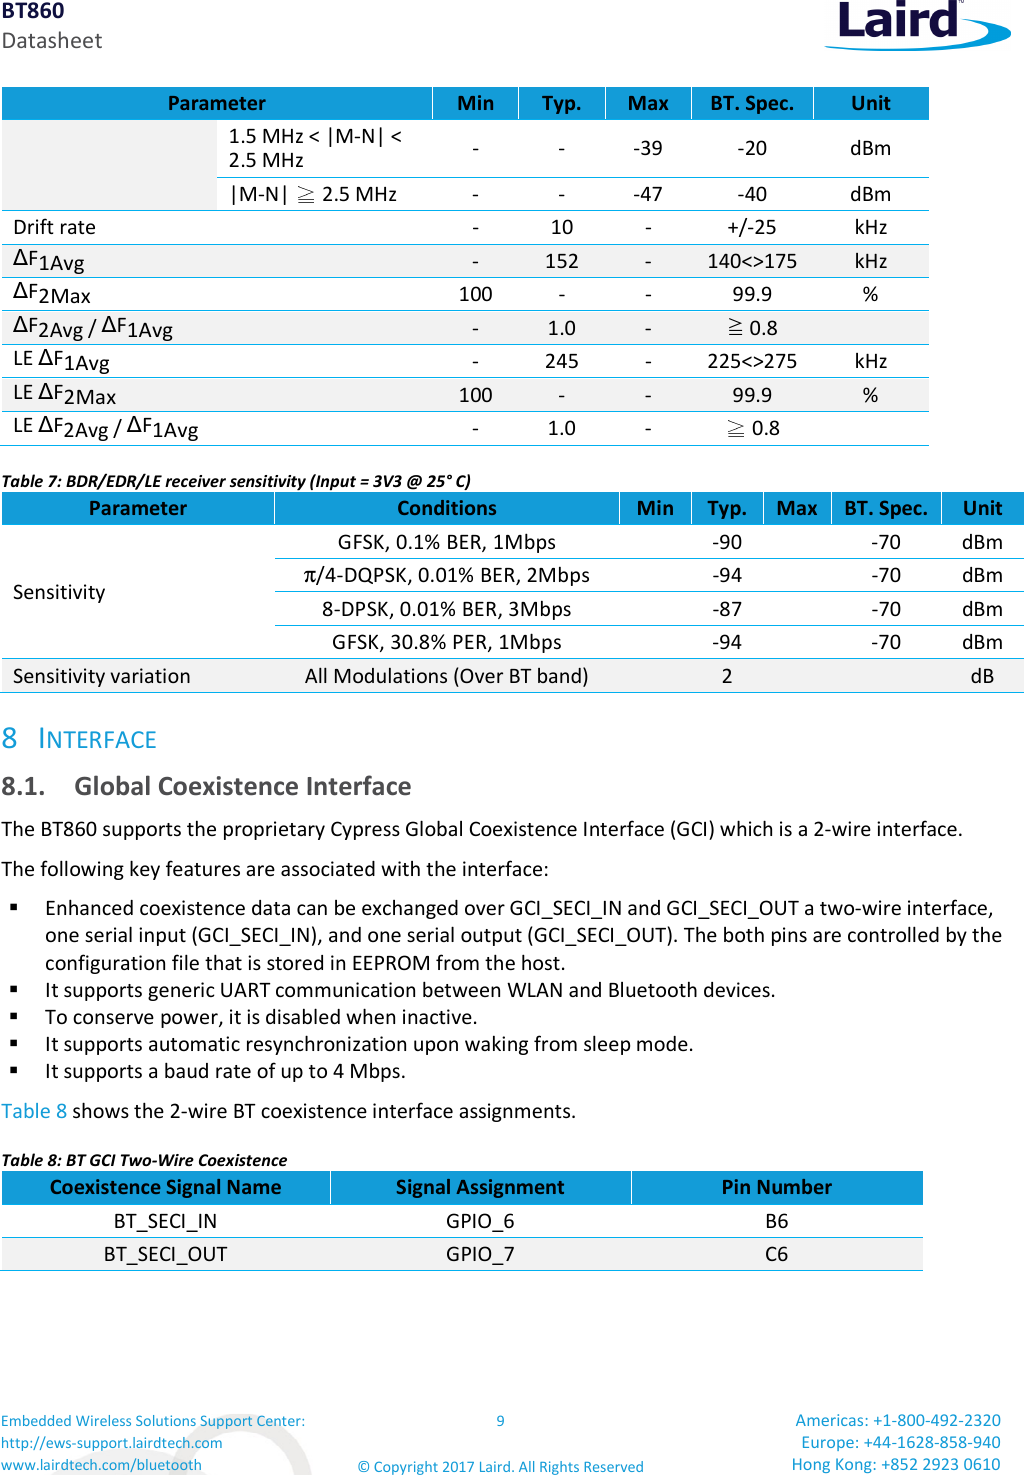 BT860 Datasheet Embedded Wireless Solutions Support Center: http://ews-support.lairdtech.com www.lairdtech.com/bluetooth 9 © Copyright 2017 Laird. All Rights Reserved Americas: +1-800-492-2320 Europe: +44-1628-858-940 Hong Kong: +852 2923 0610  Parameter  Min  Typ.  Max  BT. Spec.  Unit 1.5 MHz &lt; |M-N| &lt; 2.5 MHz  -  -  -39  -20  dBm |M-N|   2.5 MHz  -  -  -47  -40  dBm Drift rate  -  10  -  +/-25  kHz ∆F1Avg  -  152  -  140&lt;&gt;175 kHz ∆F2Max 100  -  -  99.9  % ∆F2Avg / ∆F1Avg  -  1.0  -  ≧ 0.8   LE ∆F1Avg  -  245  -  225&lt;&gt;275 kHz LE ∆F2Max  100  -  -  99.9  % LE ∆F2Avg / ∆F1Avg  -  1.0  -   0.8   Table 7: BDR/EDR/LE receiver sensitivity (Input = 3V3 @ 25° C) Parameter  Conditions  Min Typ. Max BT. Spec. Unit Sensitivity GFSK, 0.1% BER, 1Mbps    -90    -70  dBm π/4-DQPSK, 0.01% BER, 2Mbps    -94    -70  dBm 8-DPSK, 0.01% BER, 3Mbps    -87    -70  dBm GFSK, 30.8% PER, 1Mbps    -94    -70  dBm Sensitivity variation  All Modulations (Over BT band)    2      dB 8 INTERFACE 8.1. Global Coexistence Interface The BT860 supports the proprietary Cypress Global Coexistence Interface (GCI) which is a 2-wire interface. The following key features are associated with the interface:  Enhanced coexistence data can be exchanged over GCI_SECI_IN and GCI_SECI_OUT a two-wire interface, one serial input (GCI_SECI_IN), and one serial output (GCI_SECI_OUT). The both pins are controlled by the configuration file that is stored in EEPROM from the host.  It supports generic UART communication between WLAN and Bluetooth devices.  To conserve power, it is disabled when inactive.  It supports automatic resynchronization upon waking from sleep mode.  It supports a baud rate of up to 4 Mbps. Table 8 shows the 2-wire BT coexistence interface assignments. Table 8: BT GCI Two-Wire Coexistence Coexistence Signal Name  Signal Assignment  Pin Number BT_SECI_IN  GPIO_6  B6 BT_SECI_OUT  GPIO_7  C6    